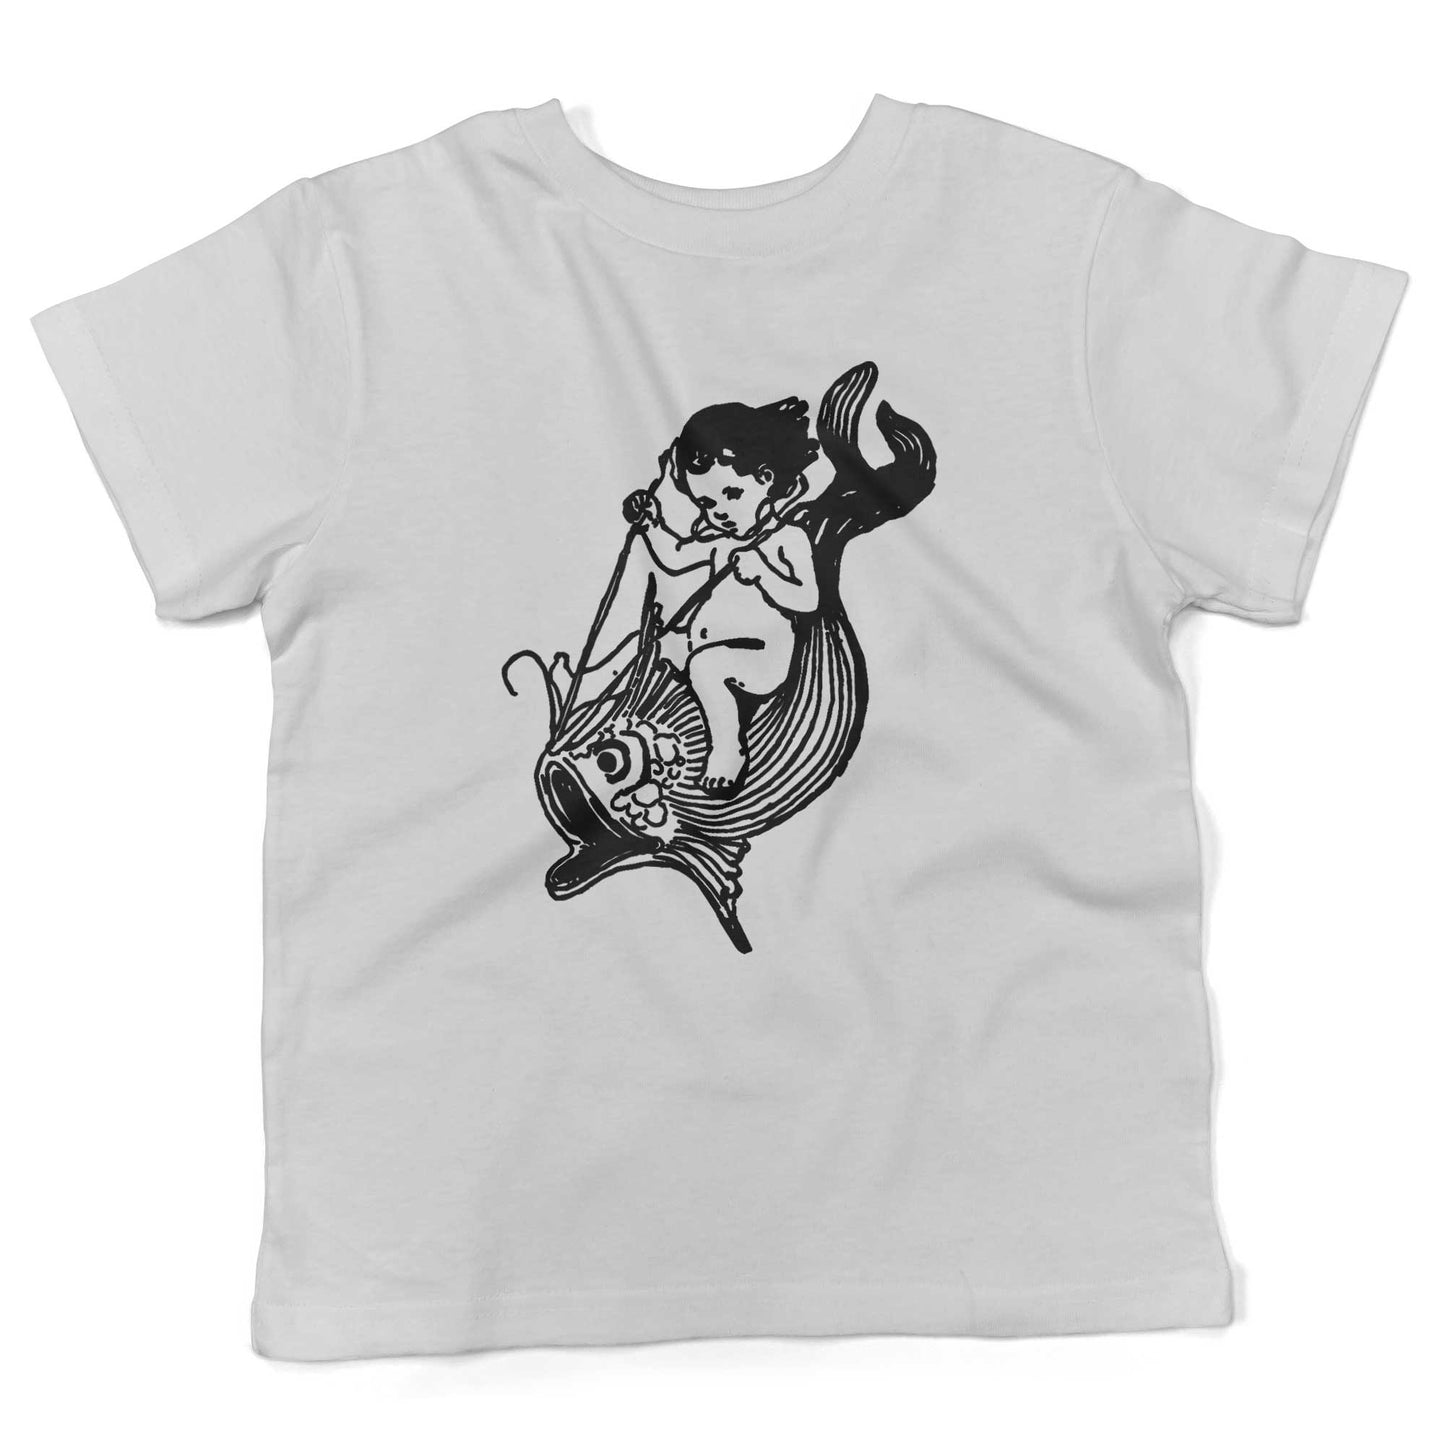 Water Baby Riding A Giant Fish Toddler Shirt-White-2T